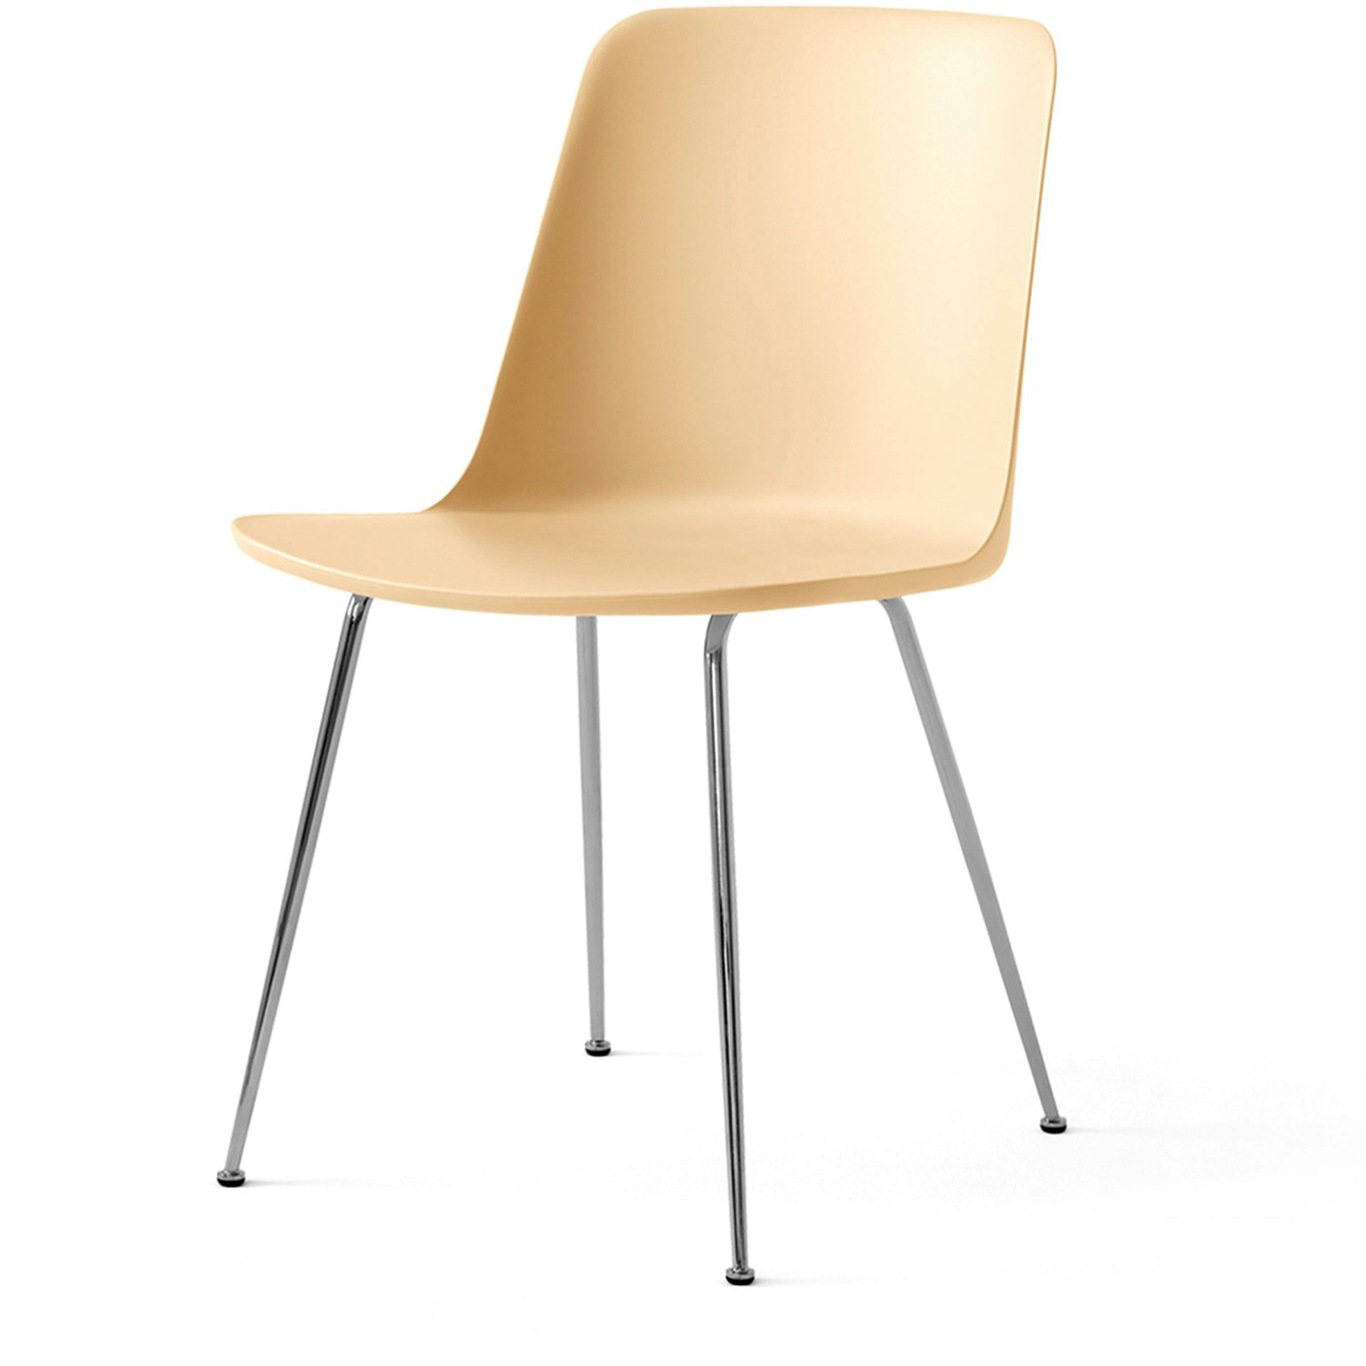 Rely Chair HW6, Chrome / Beige